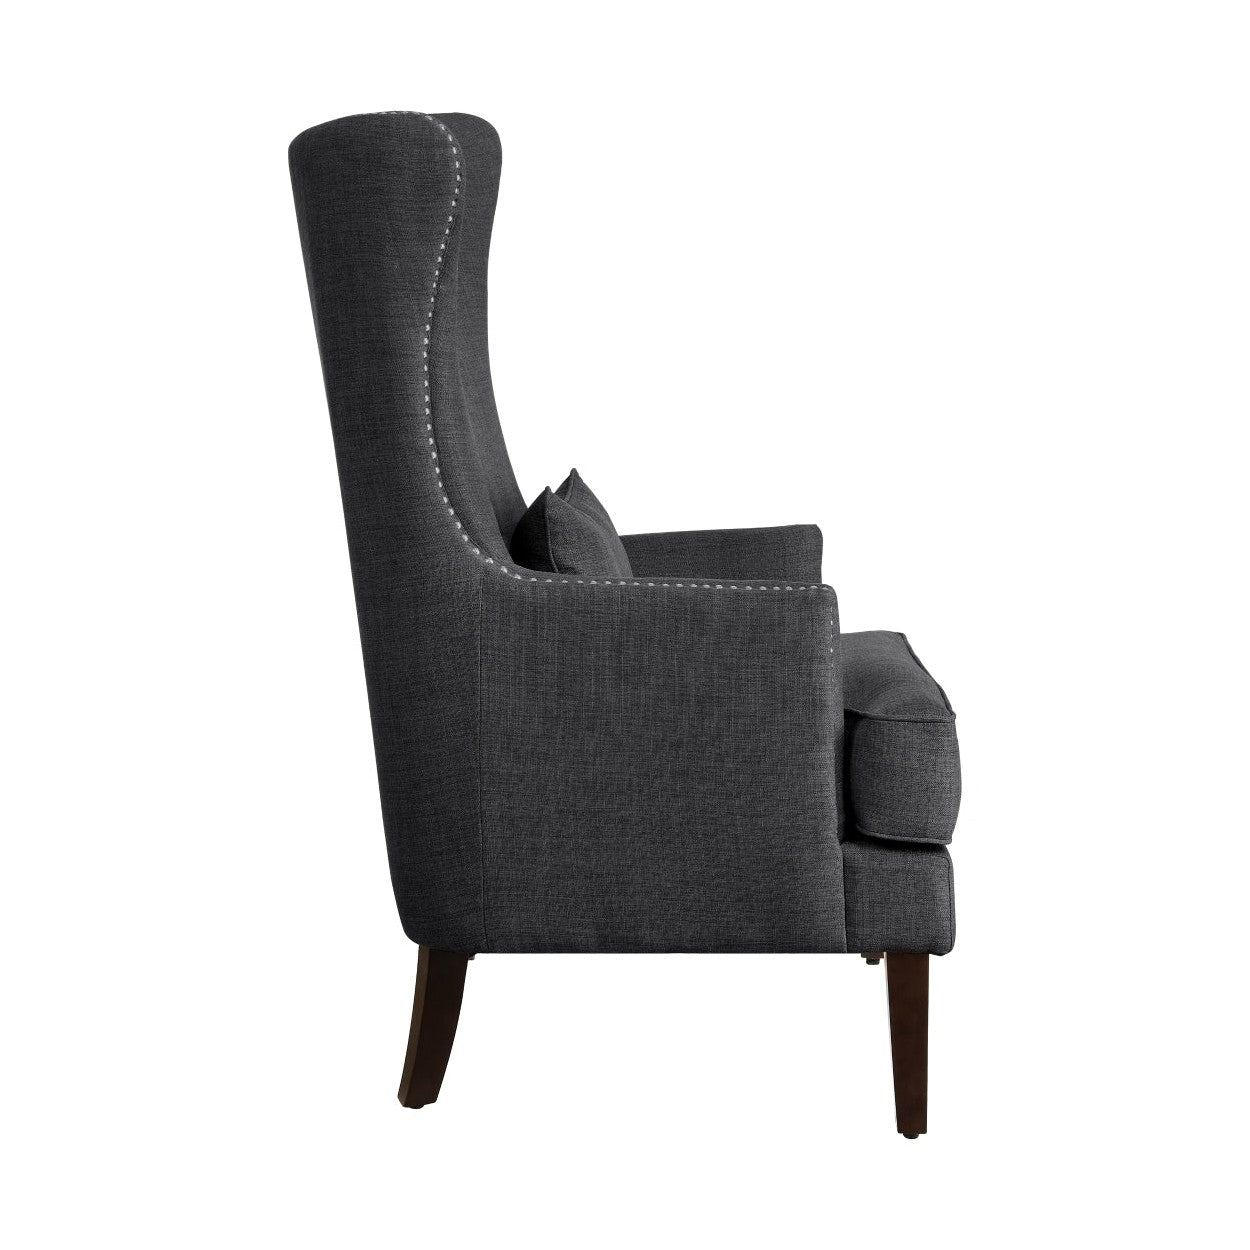 ACCENT CHAIR W/ KIDNEY PILLOW, CHARCOAL 100% POLYESTER 1296F1S